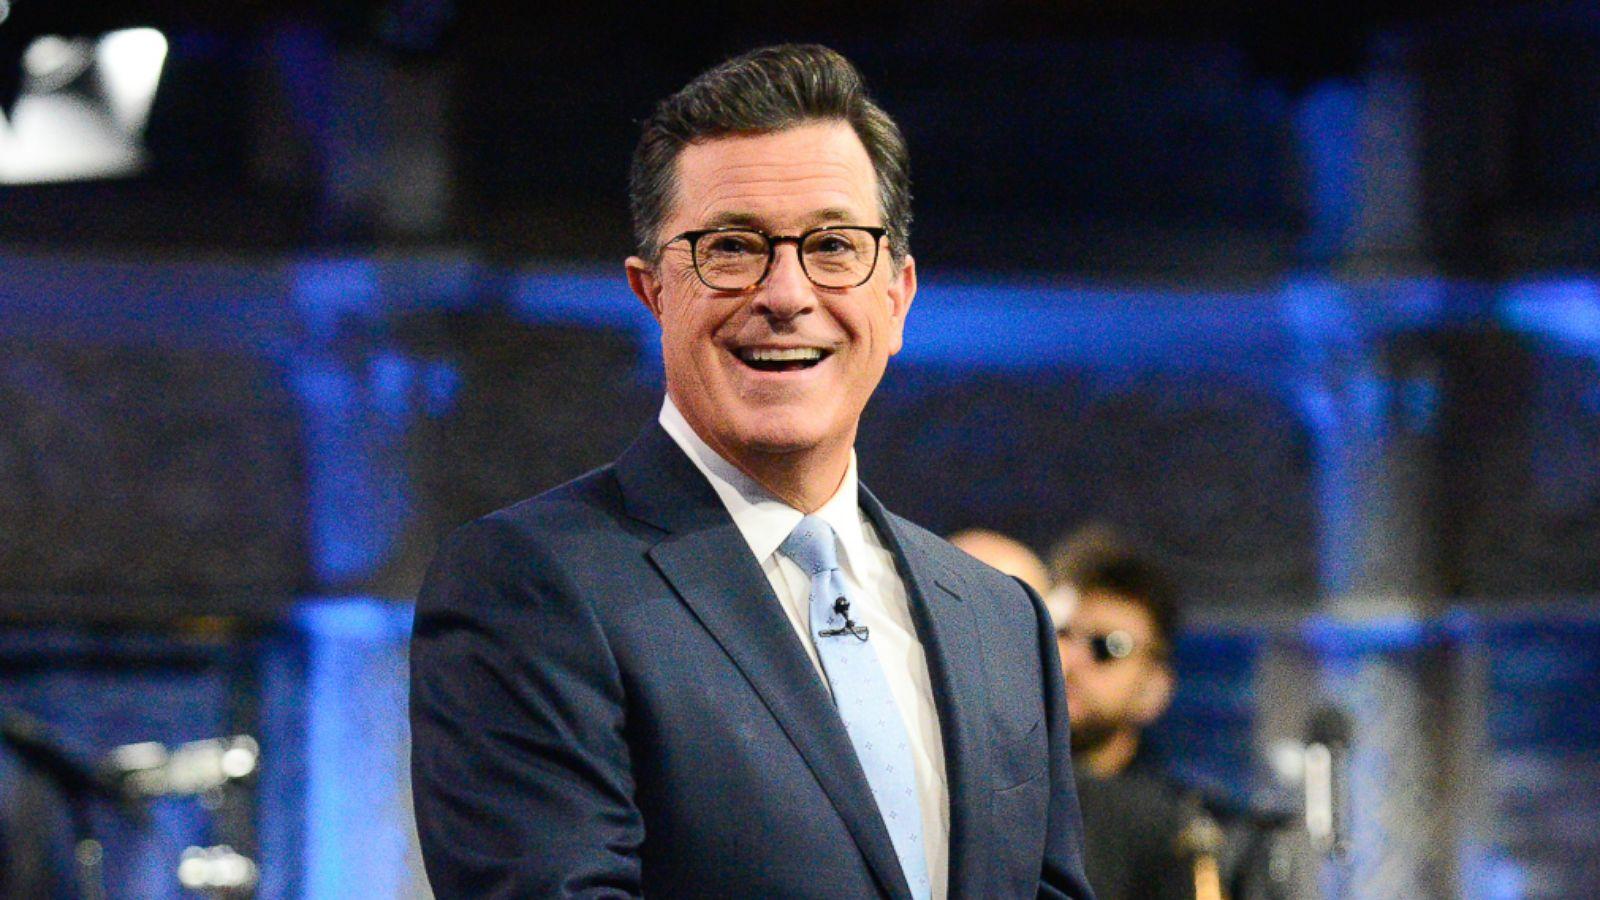 Stephen Colbert tackles stolen data scandal: 'The one time I